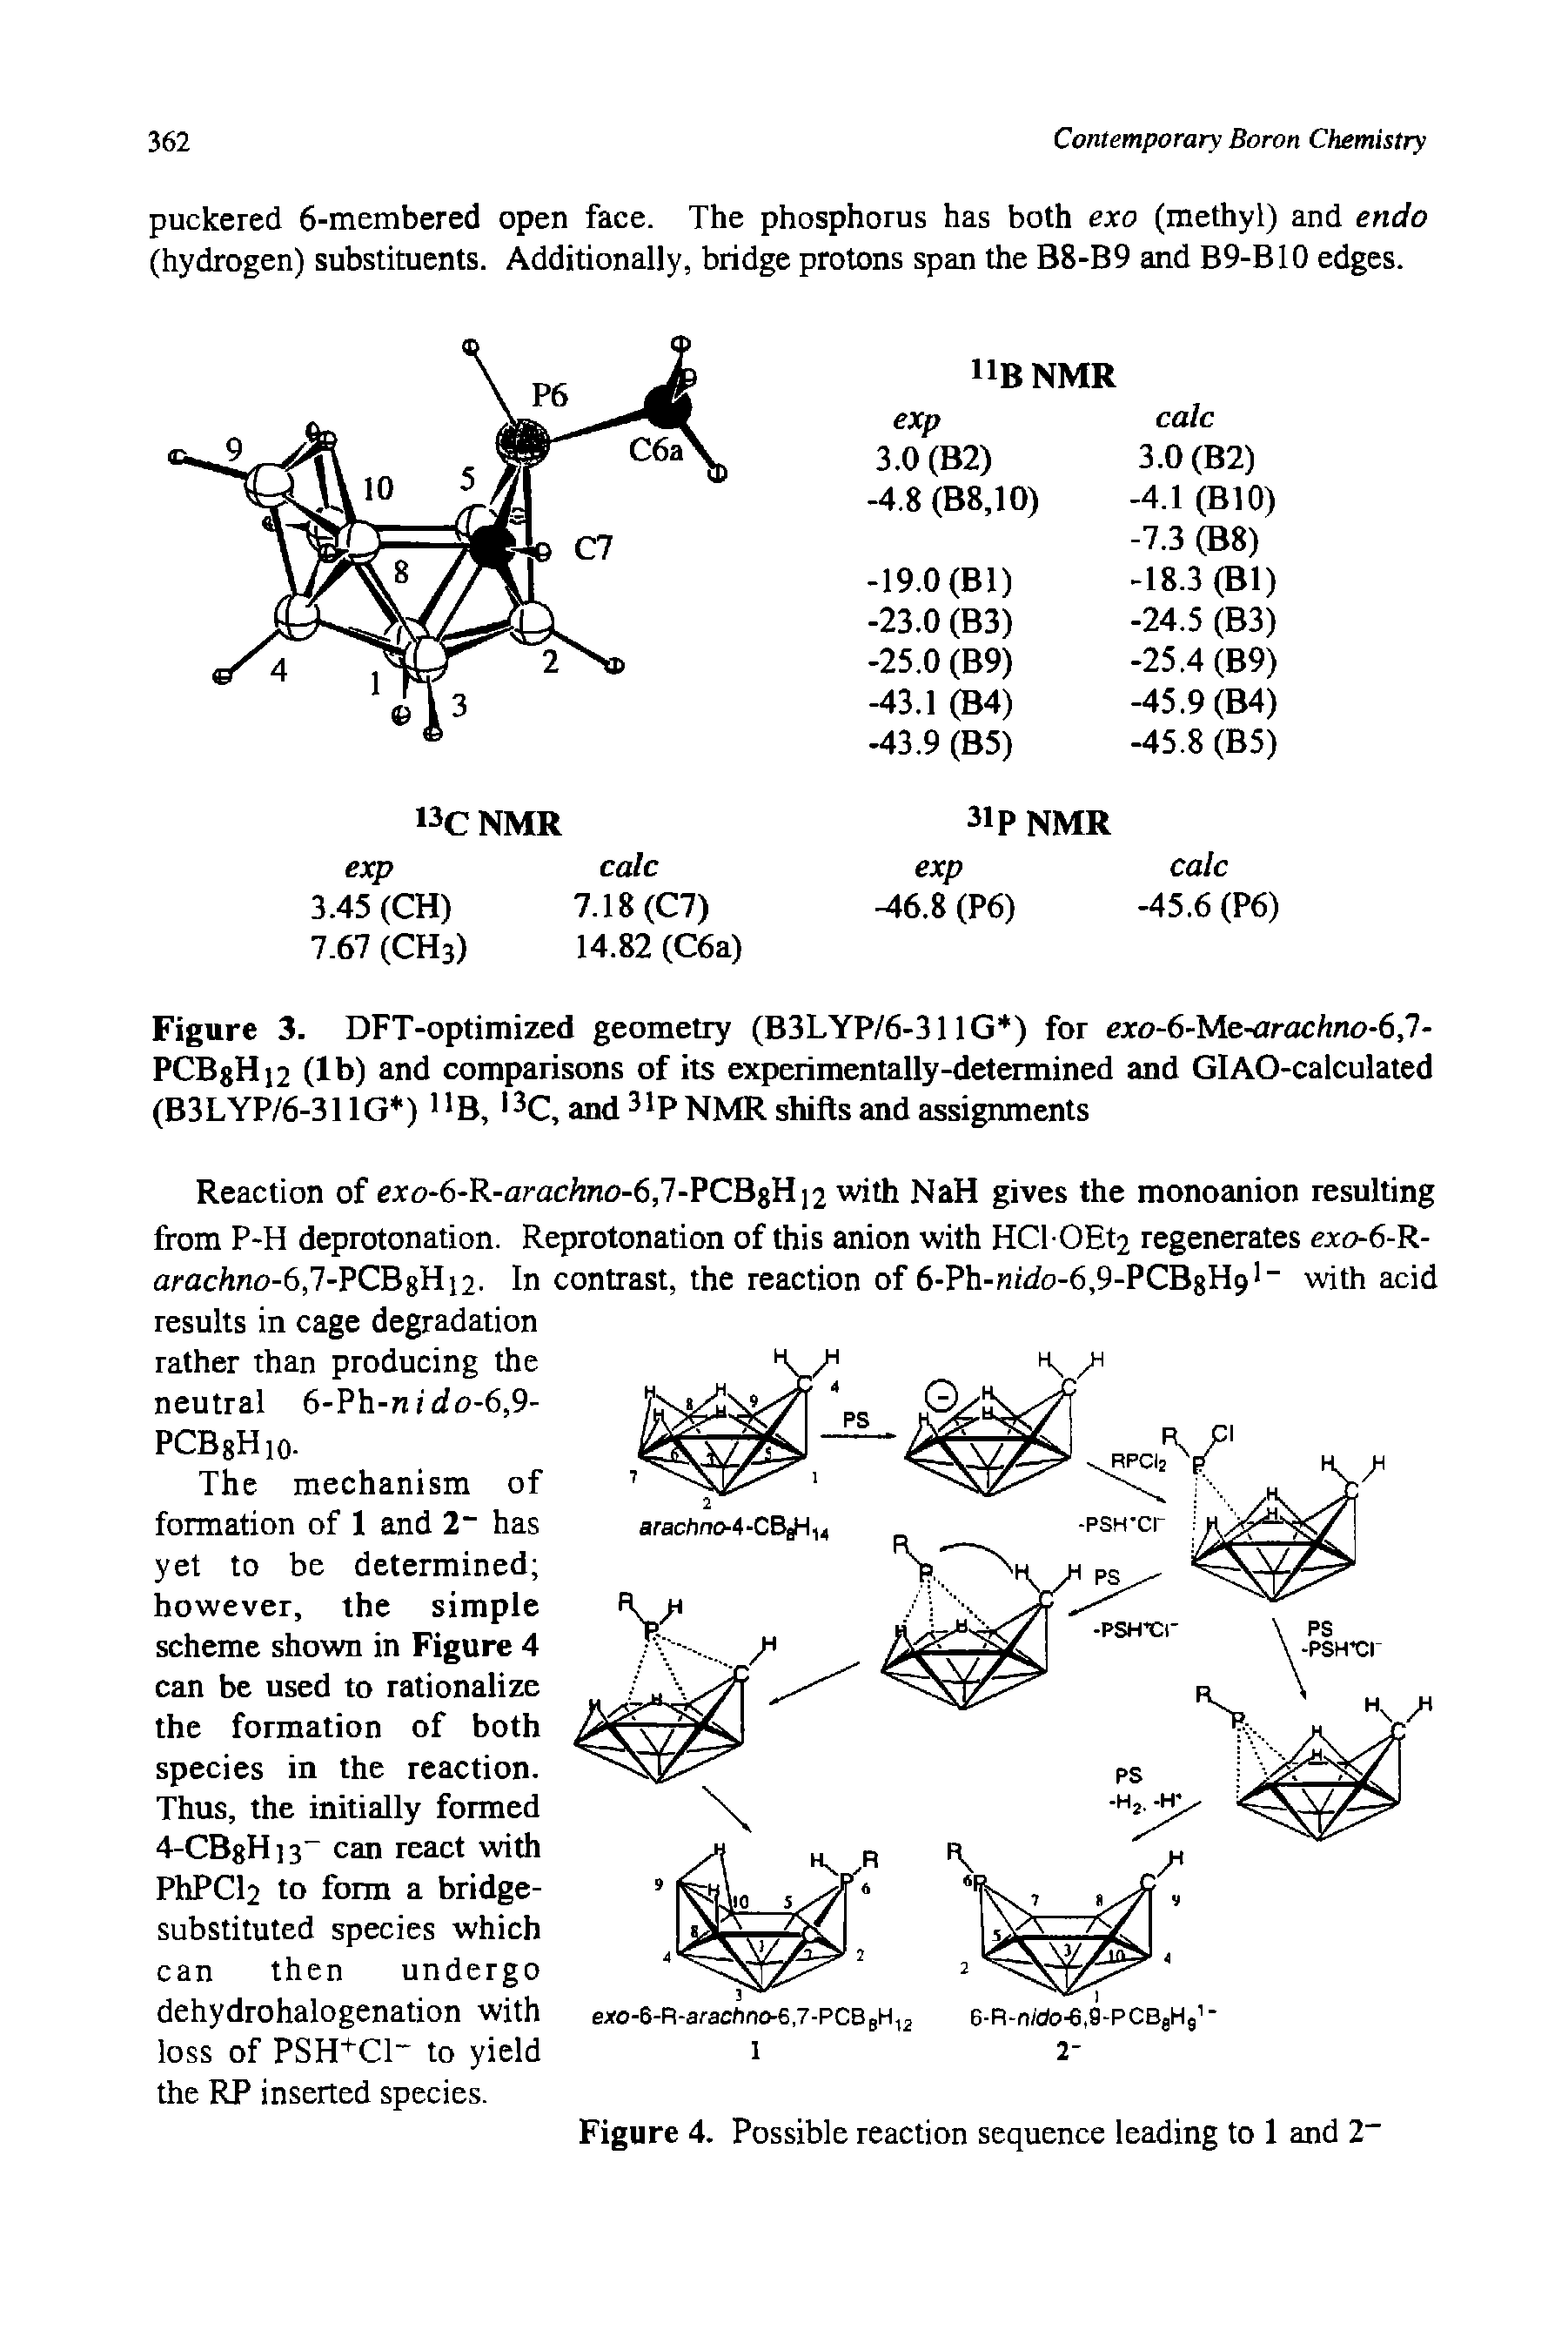 Figure 3. DFT-optimized geometry (B3LYP/6-311G ) for exo-6-Me-arachno-6,l-PCBgHi2 (lb) and comparisons of its experimentally-determined and GlAO-calculated (B3LYP/6-311G ) 1 B, 13C, and 31P NMR shifts and assignments...